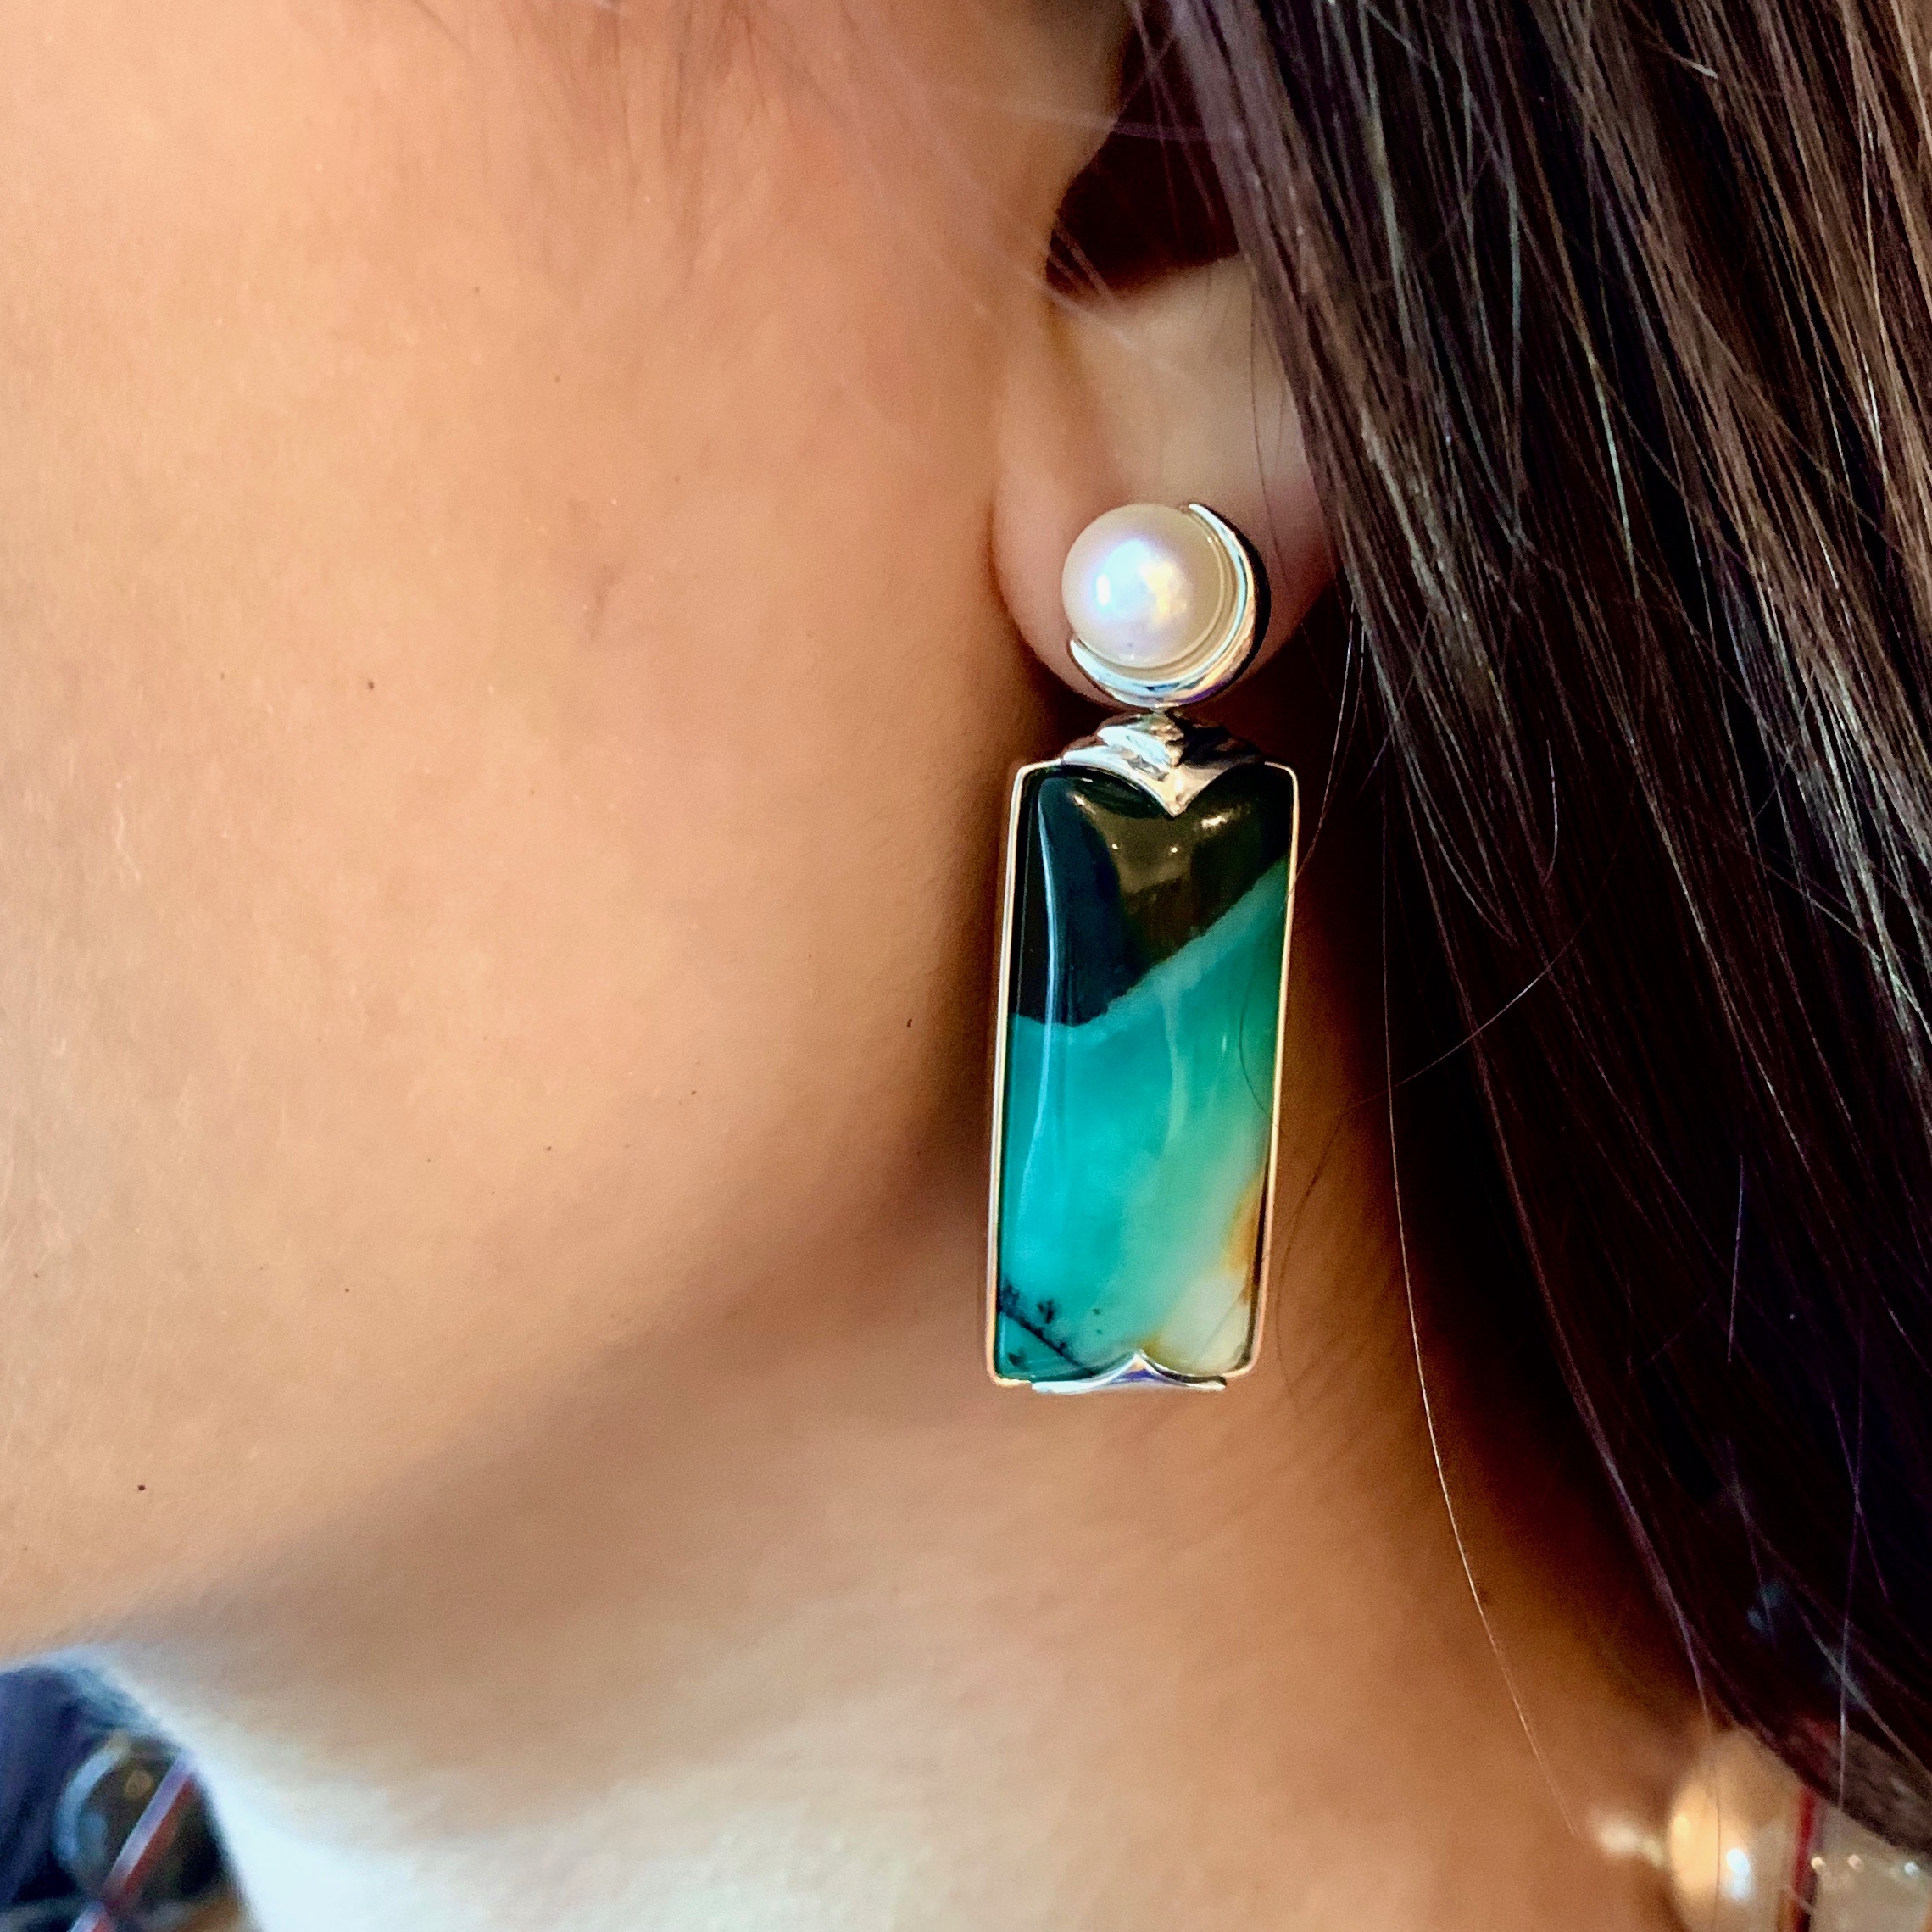 Close-up of model wearing opalized earrings in deep ocean green and aqua green topped with a round white pearl